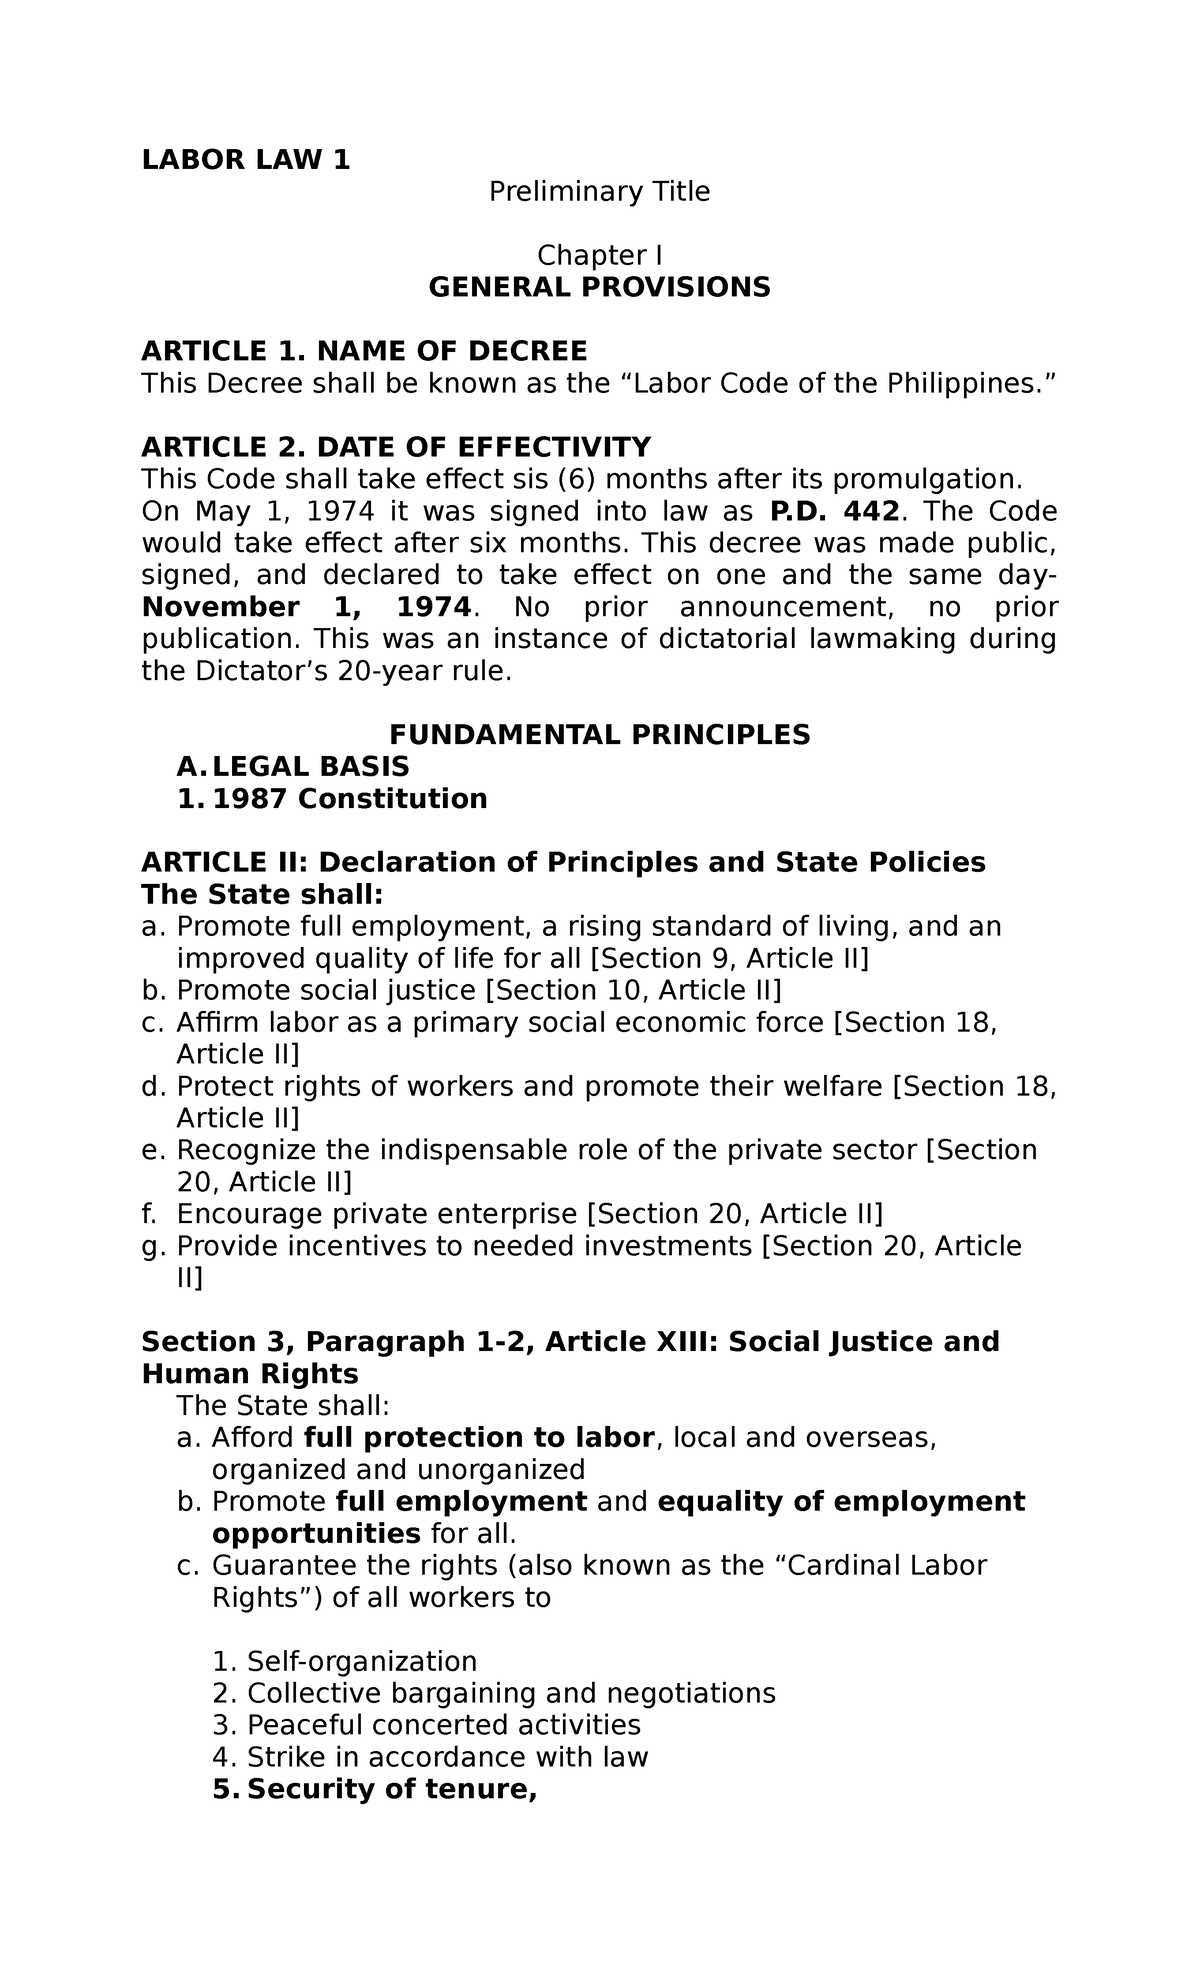 Carl Labor Textbook Summary Labor Law 1 Preliminary Title Chapter I General Provisions Article 6930